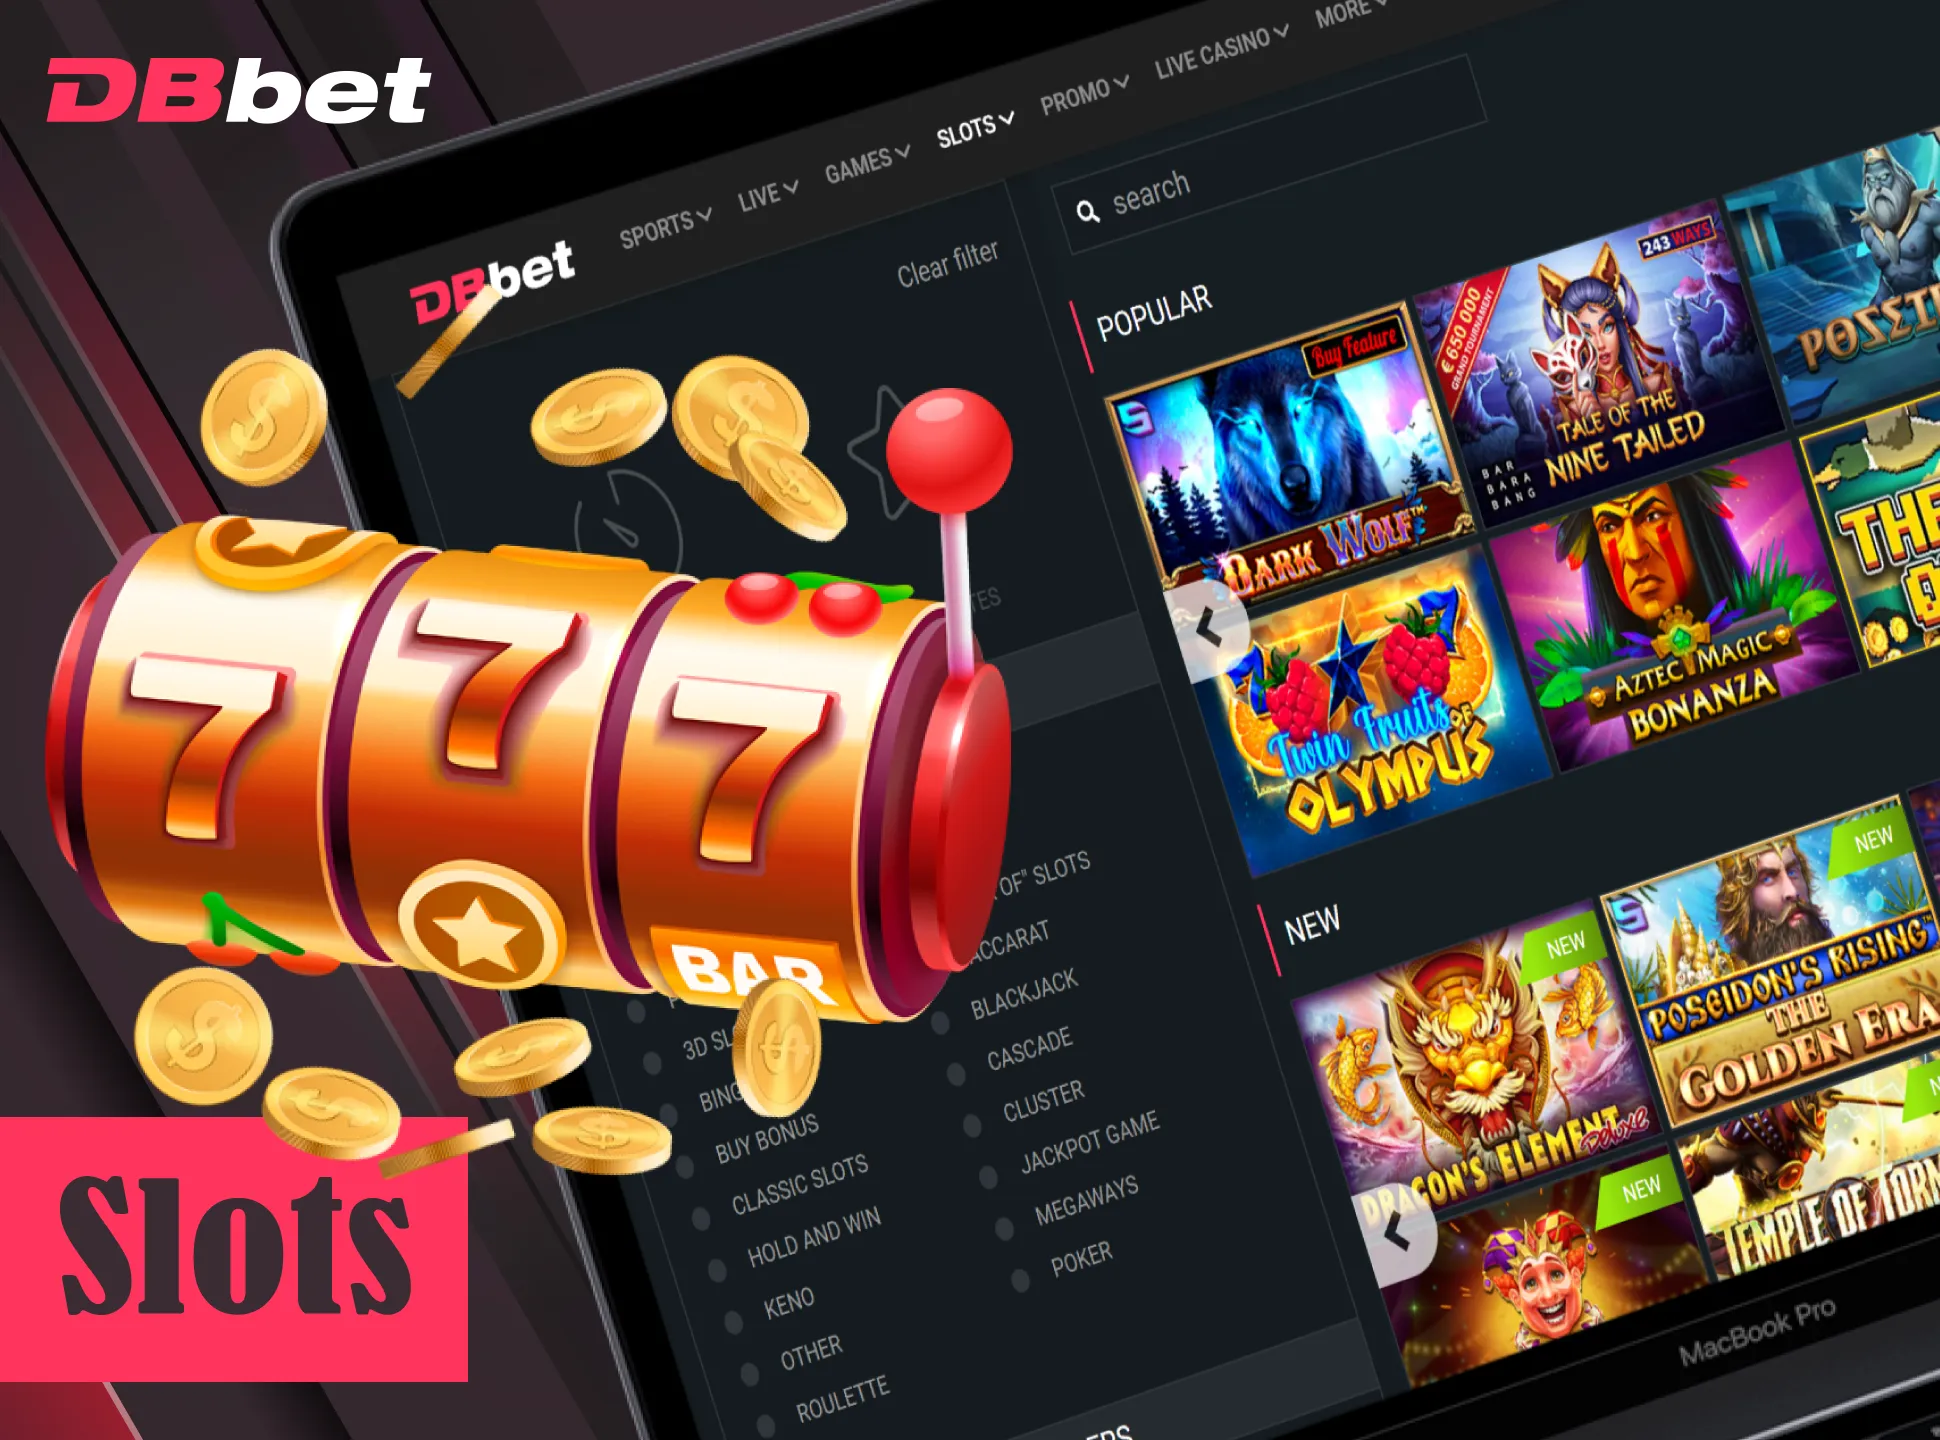 Search for your favourite slots at DBbet.